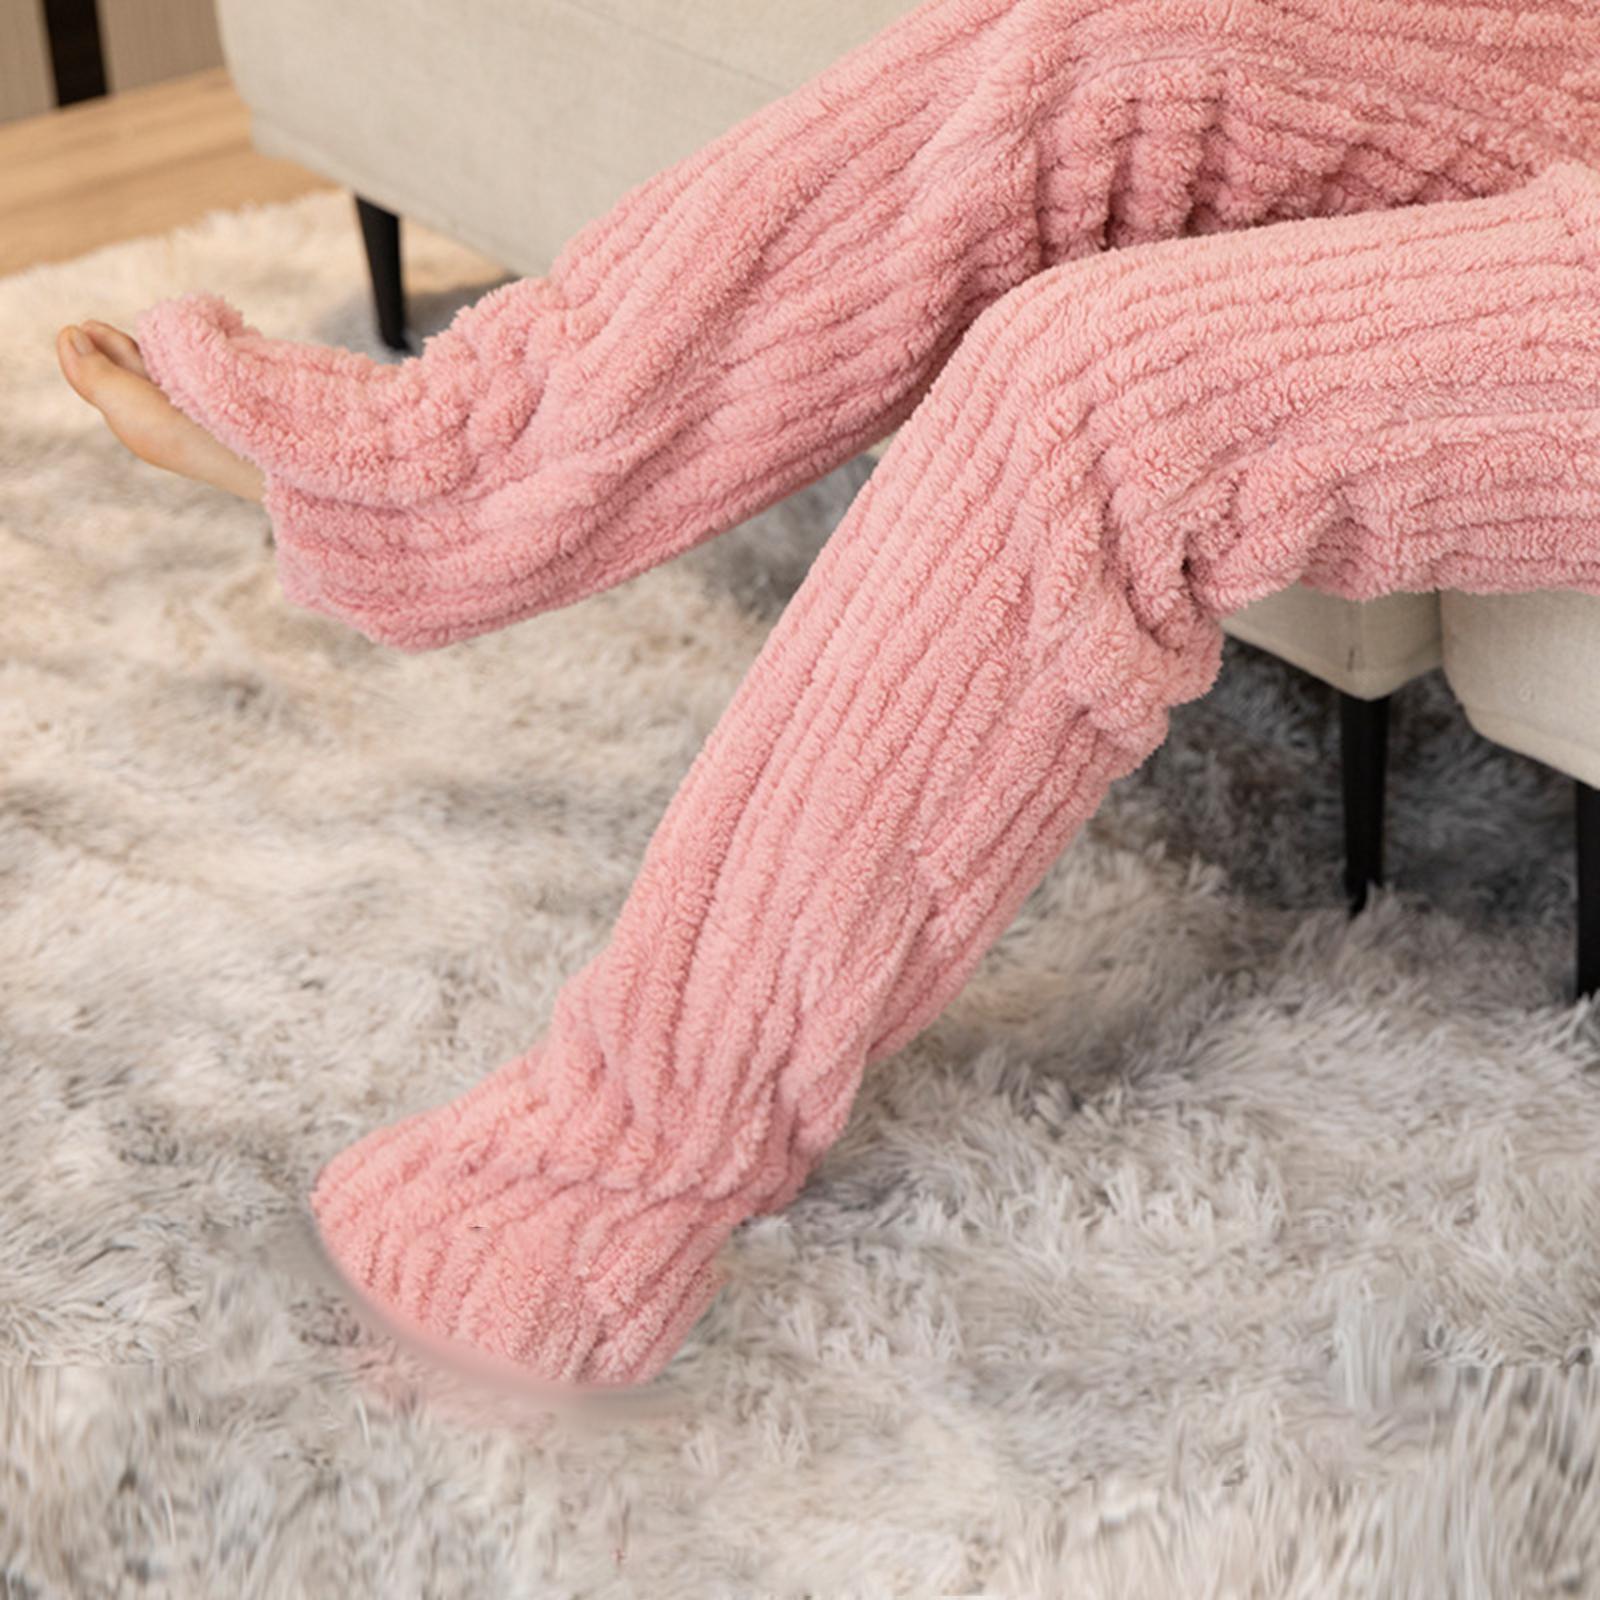 over Knee High Fuzzy Socks Lady Thigh High Socks for Home Office Living Room